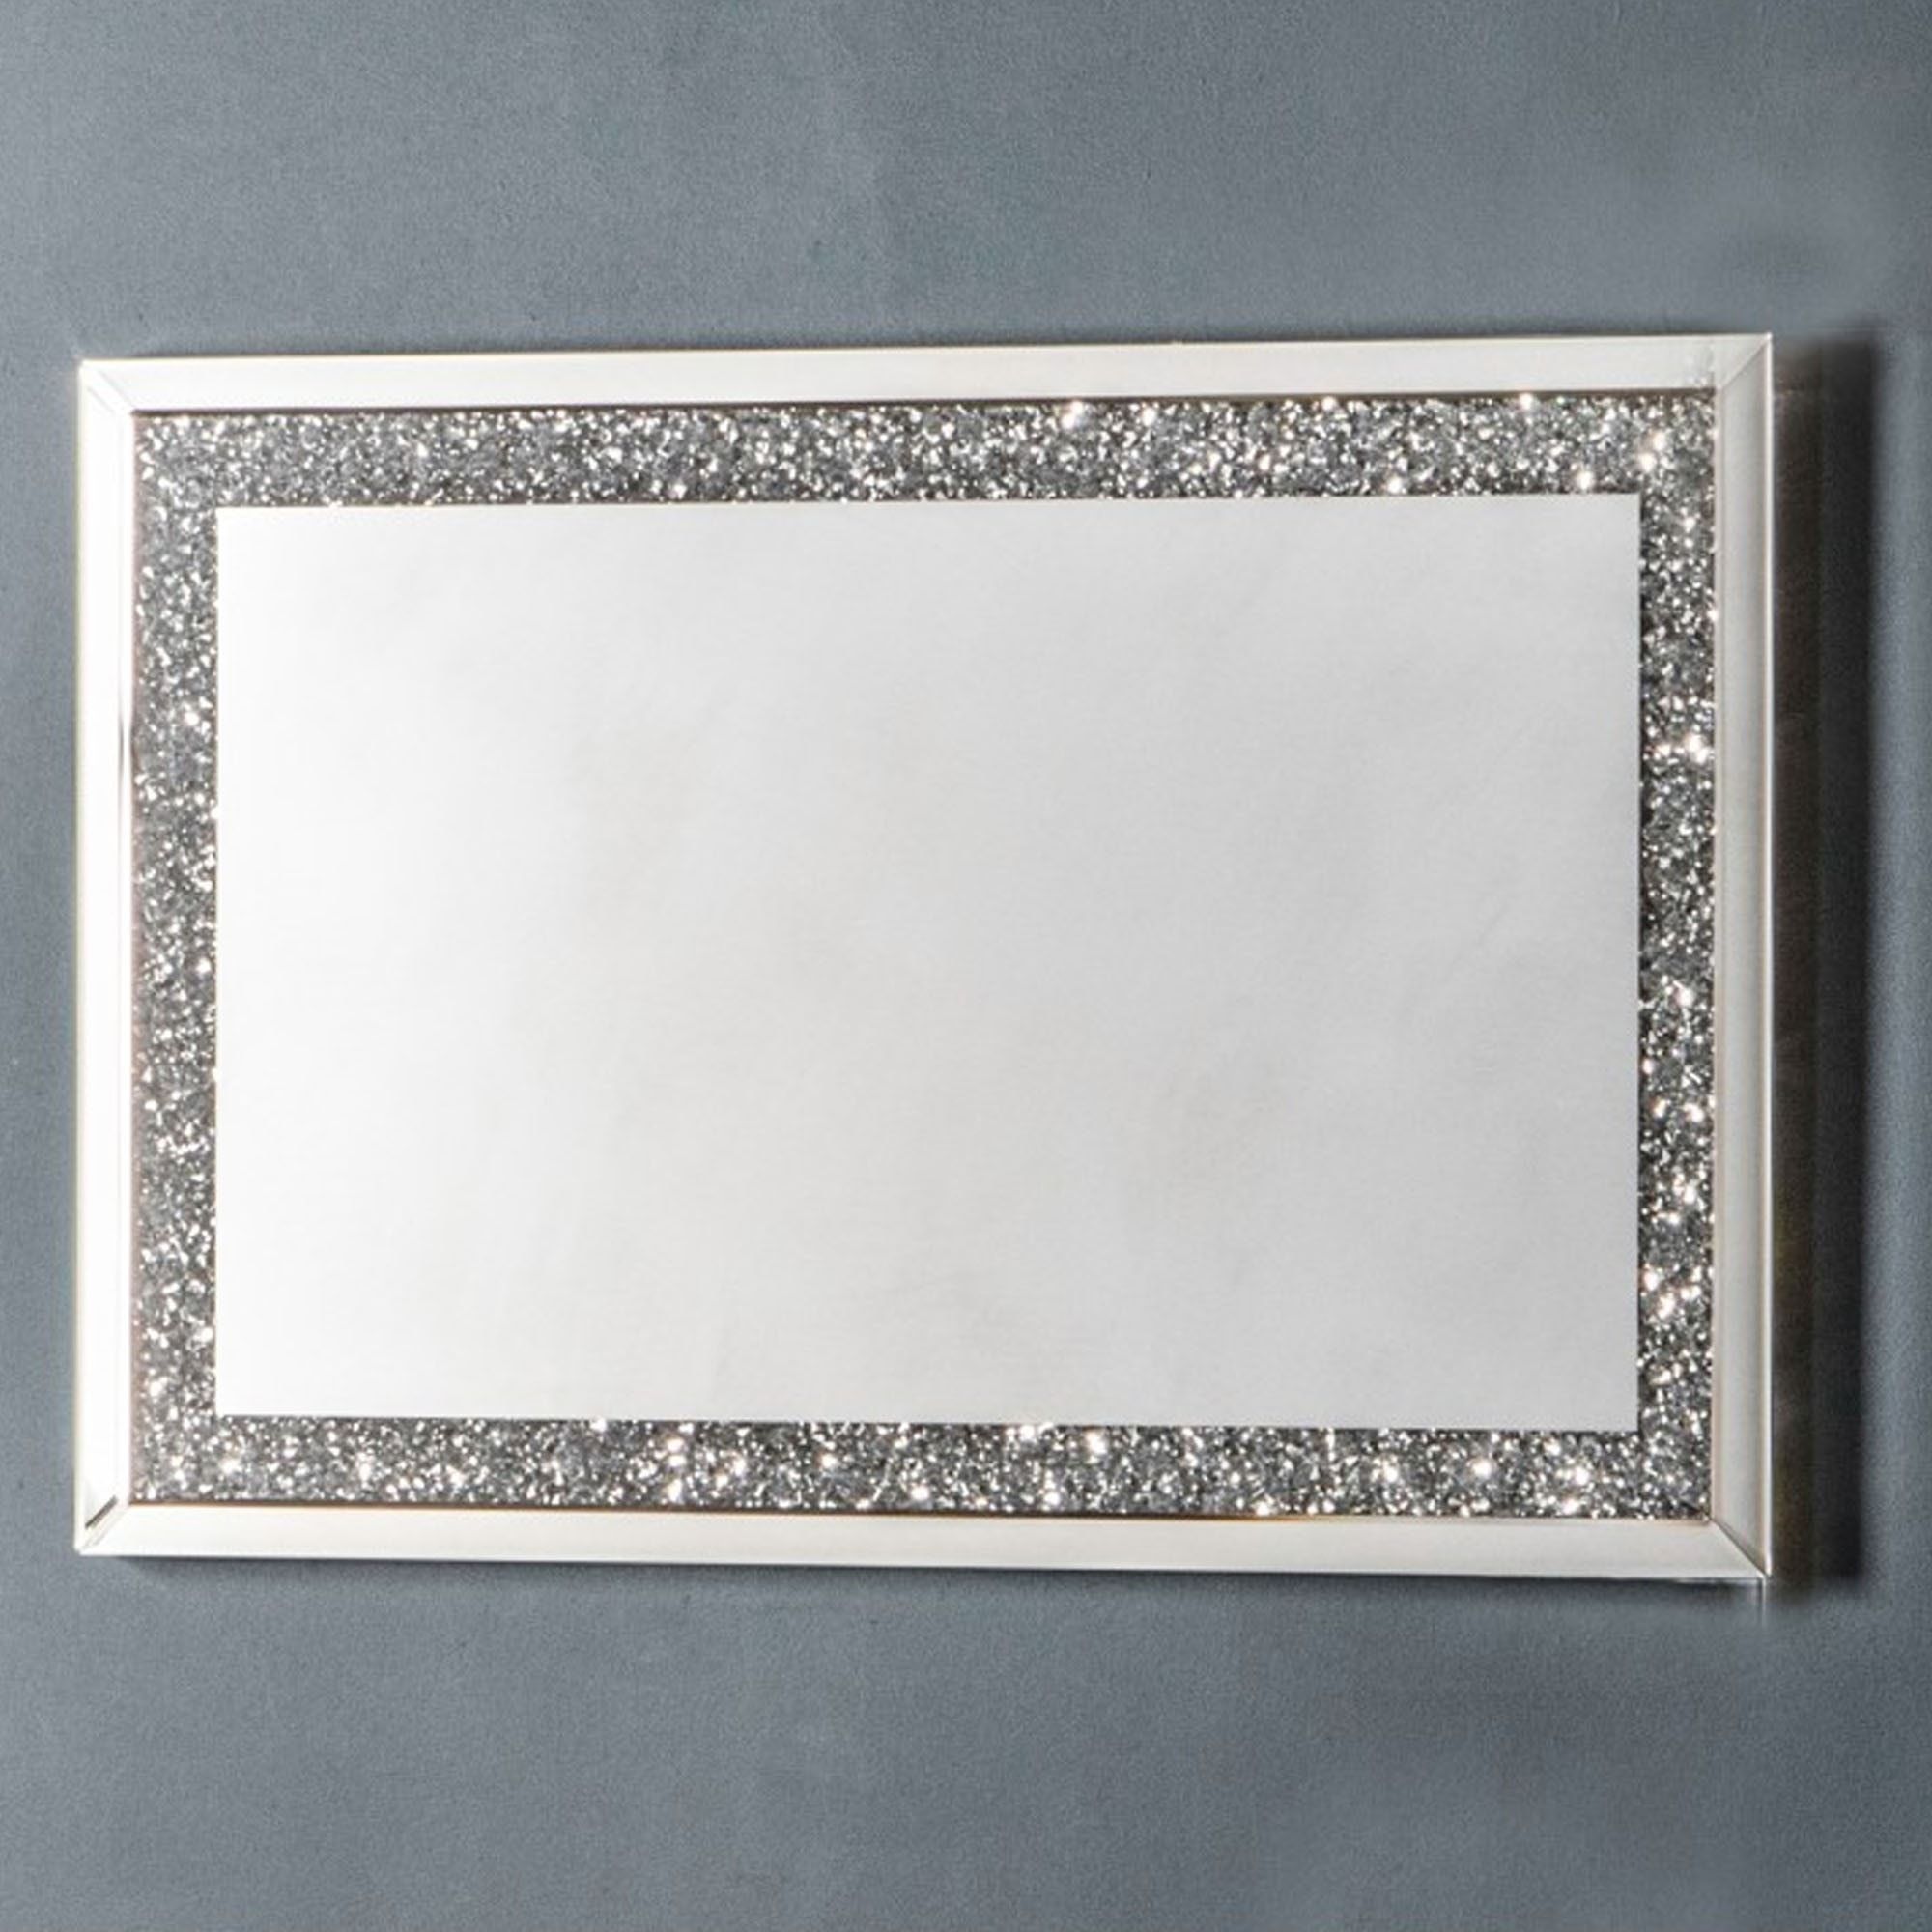 Westmoore Silver Mirror | Diamond Mirror | Crushed Glass Mirror Pertaining To Silver Metal Cut Edge Wall Mirrors (View 8 of 15)